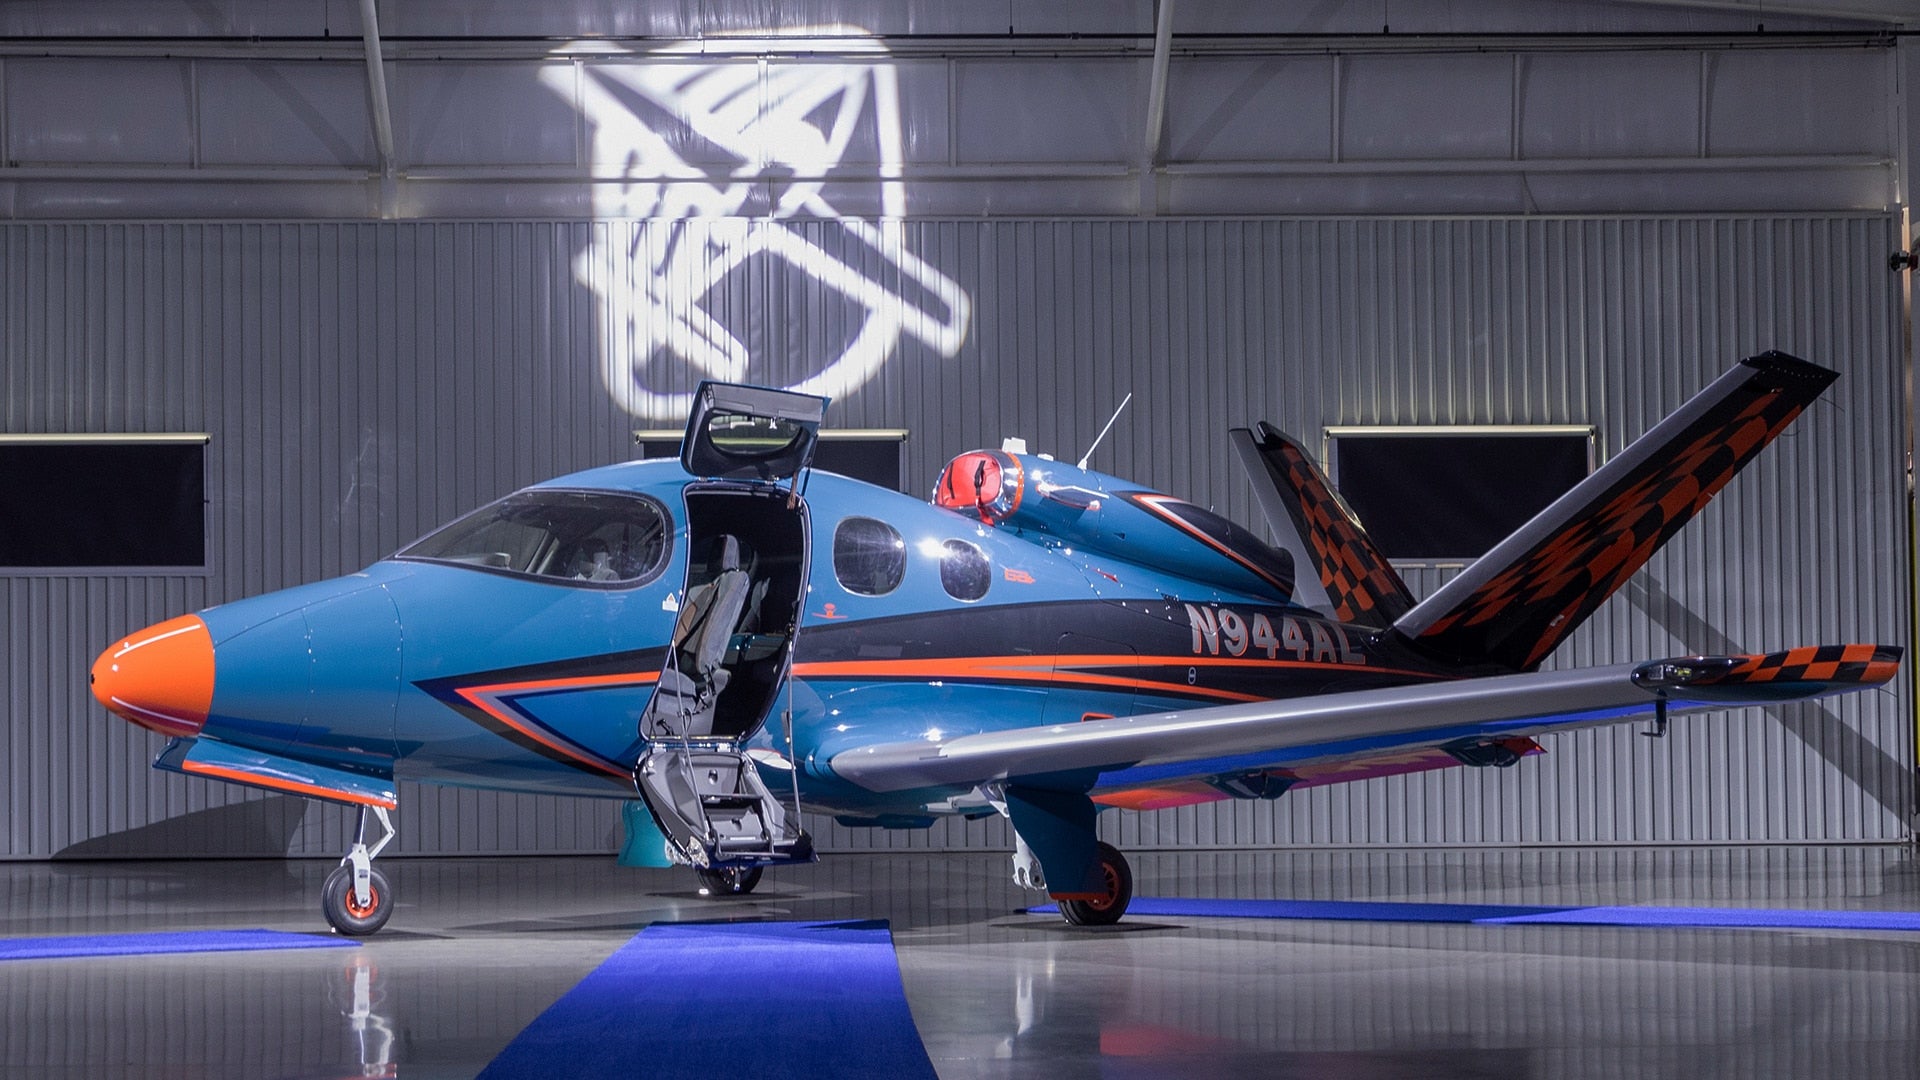 Cirrus Aircraft Expands Duluth Paint and Finish Facility to Meet Growing Demand 